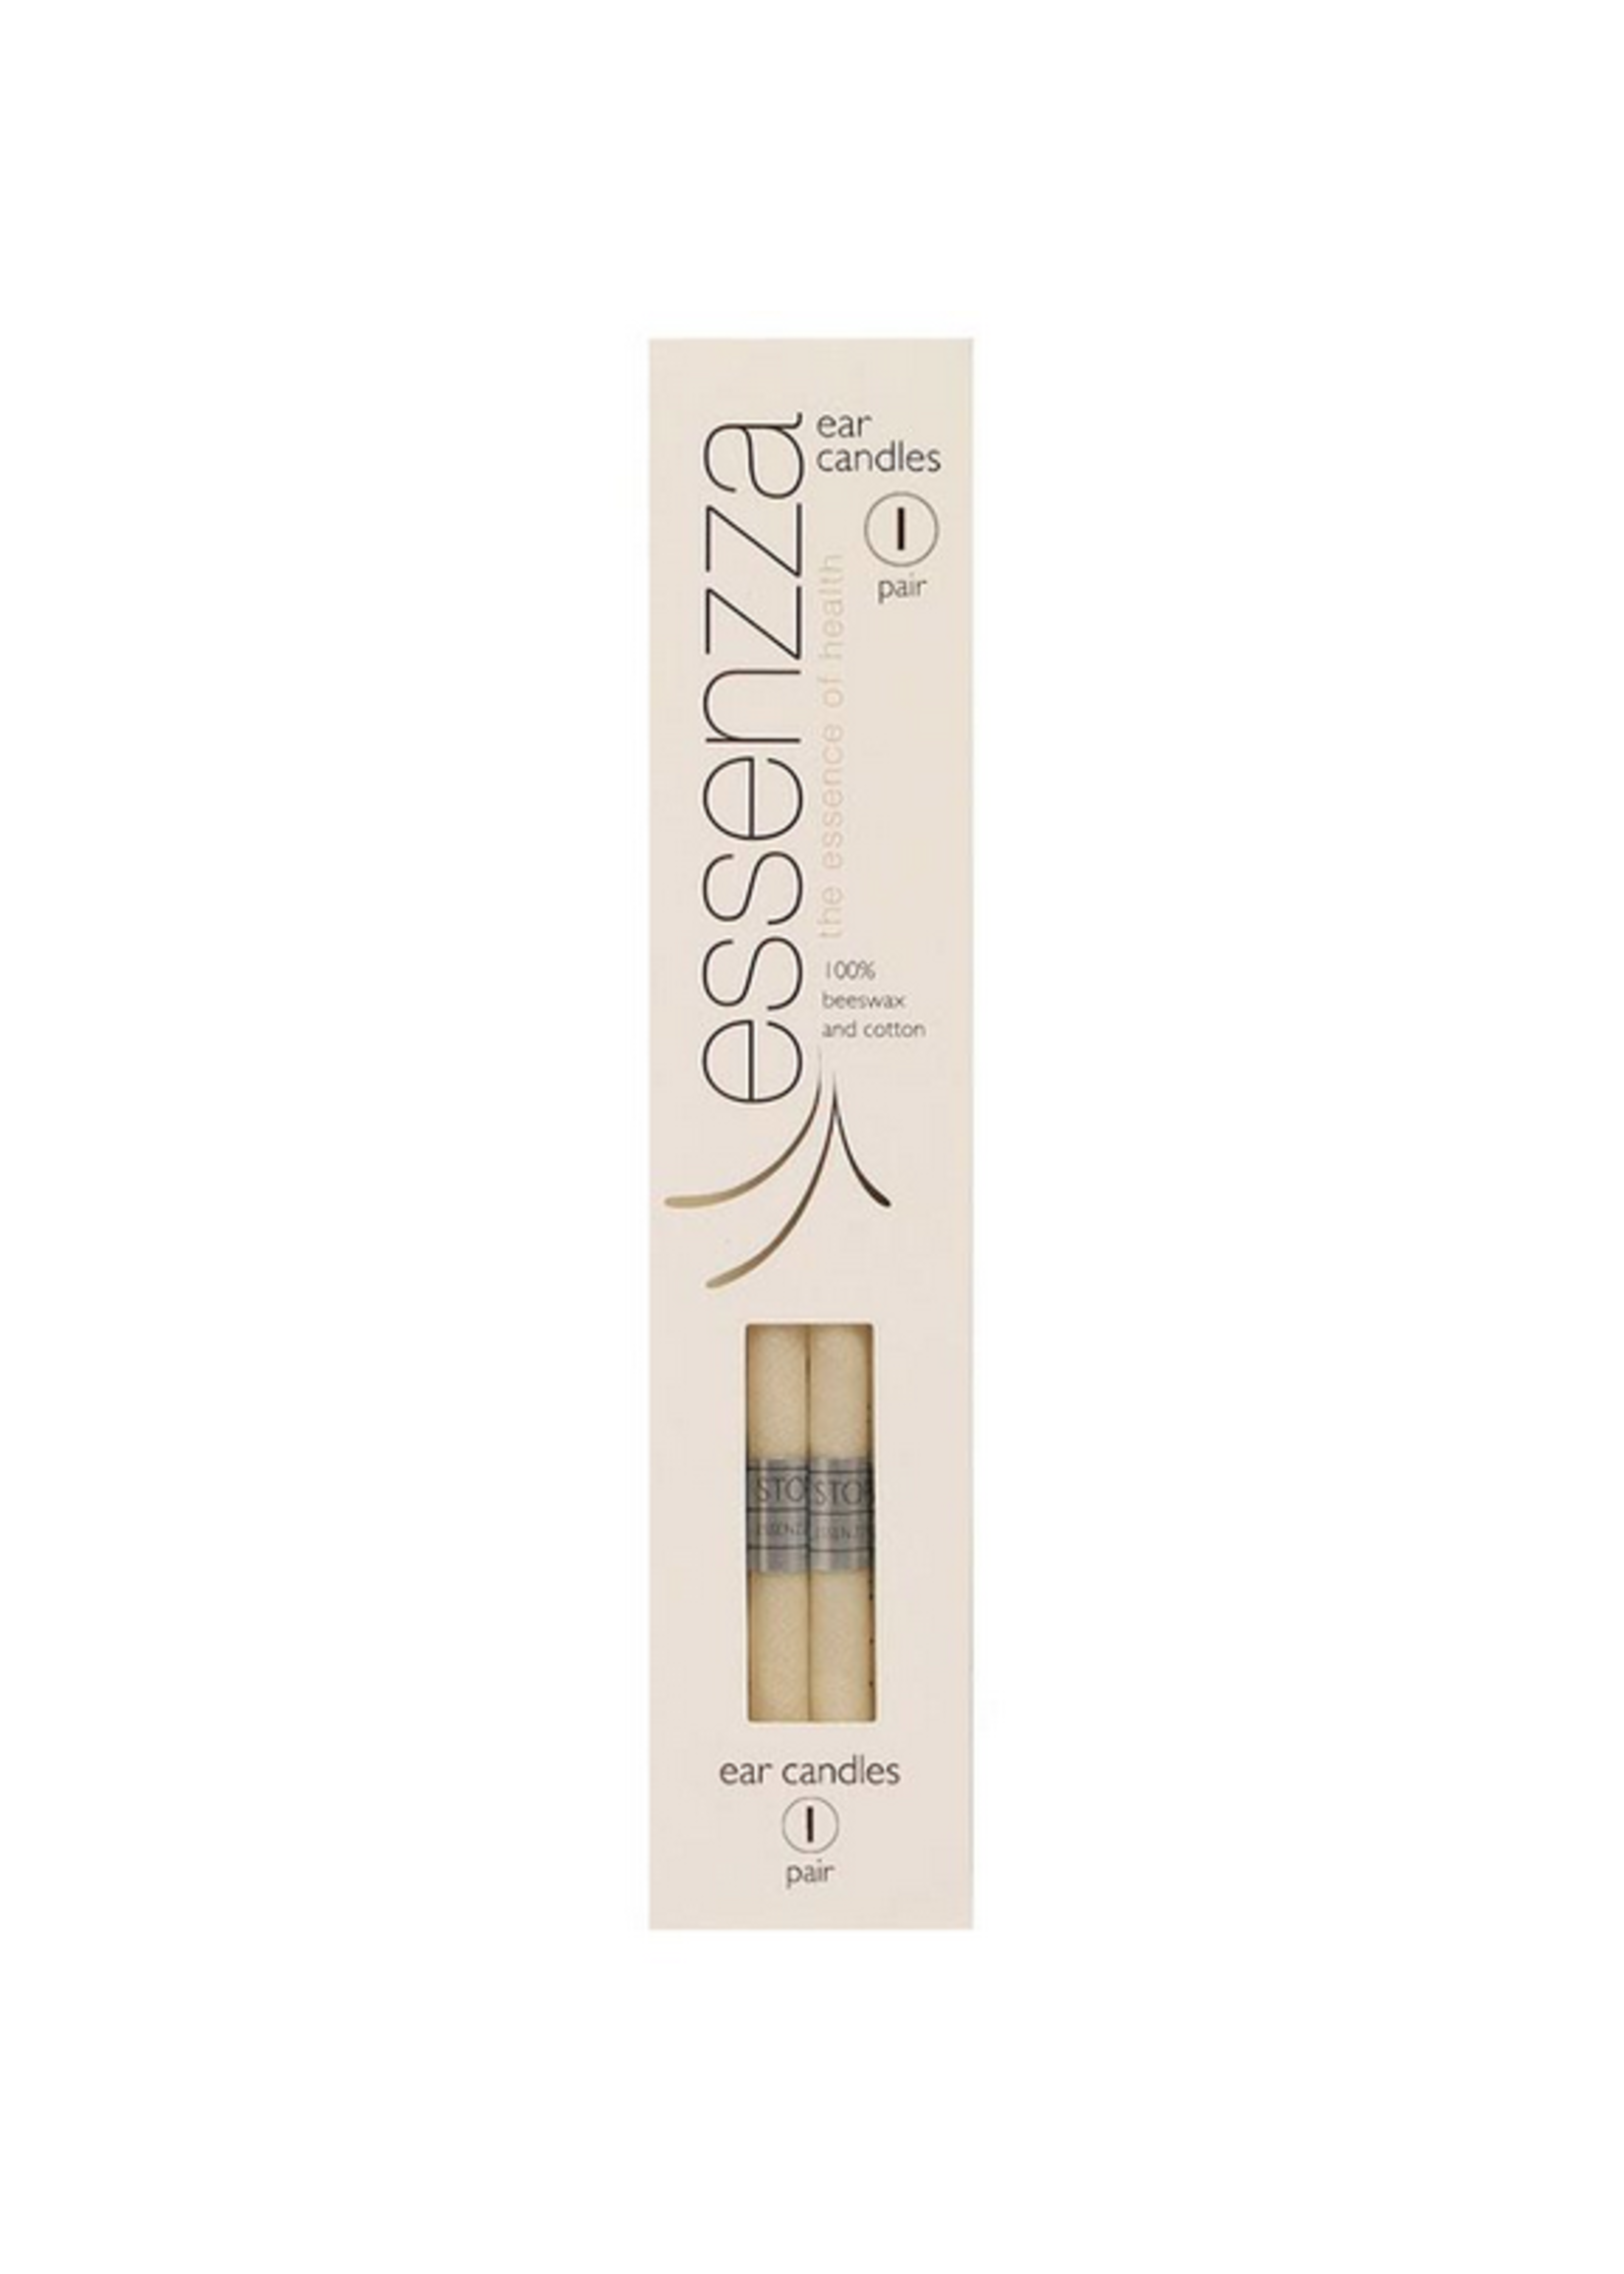 Essenzza Essenzza Ear Candles 1 Pair